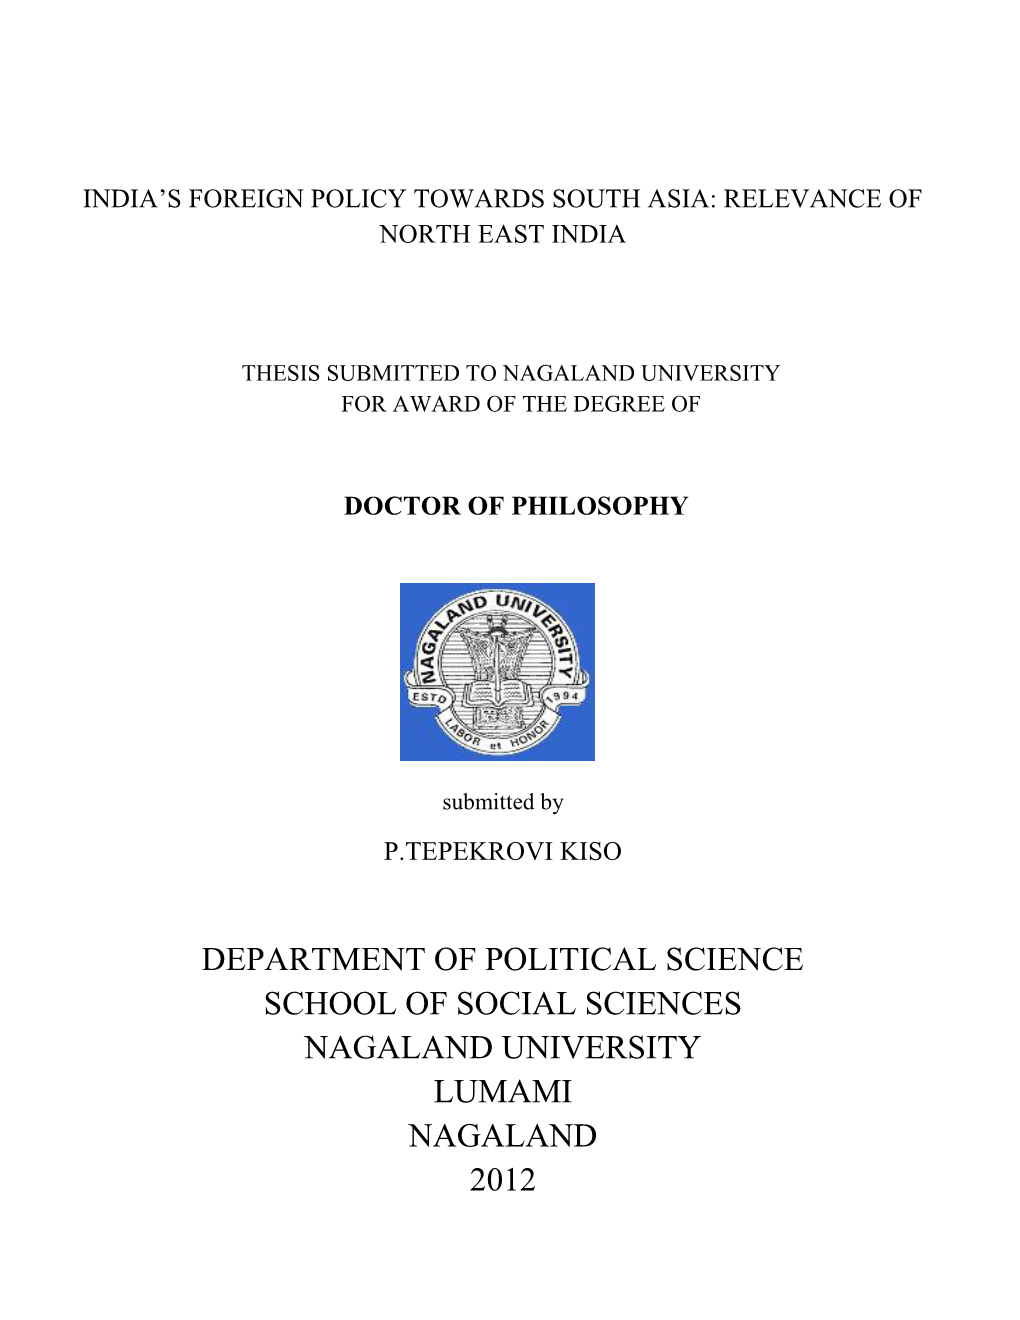 Department of Political Science School of Social